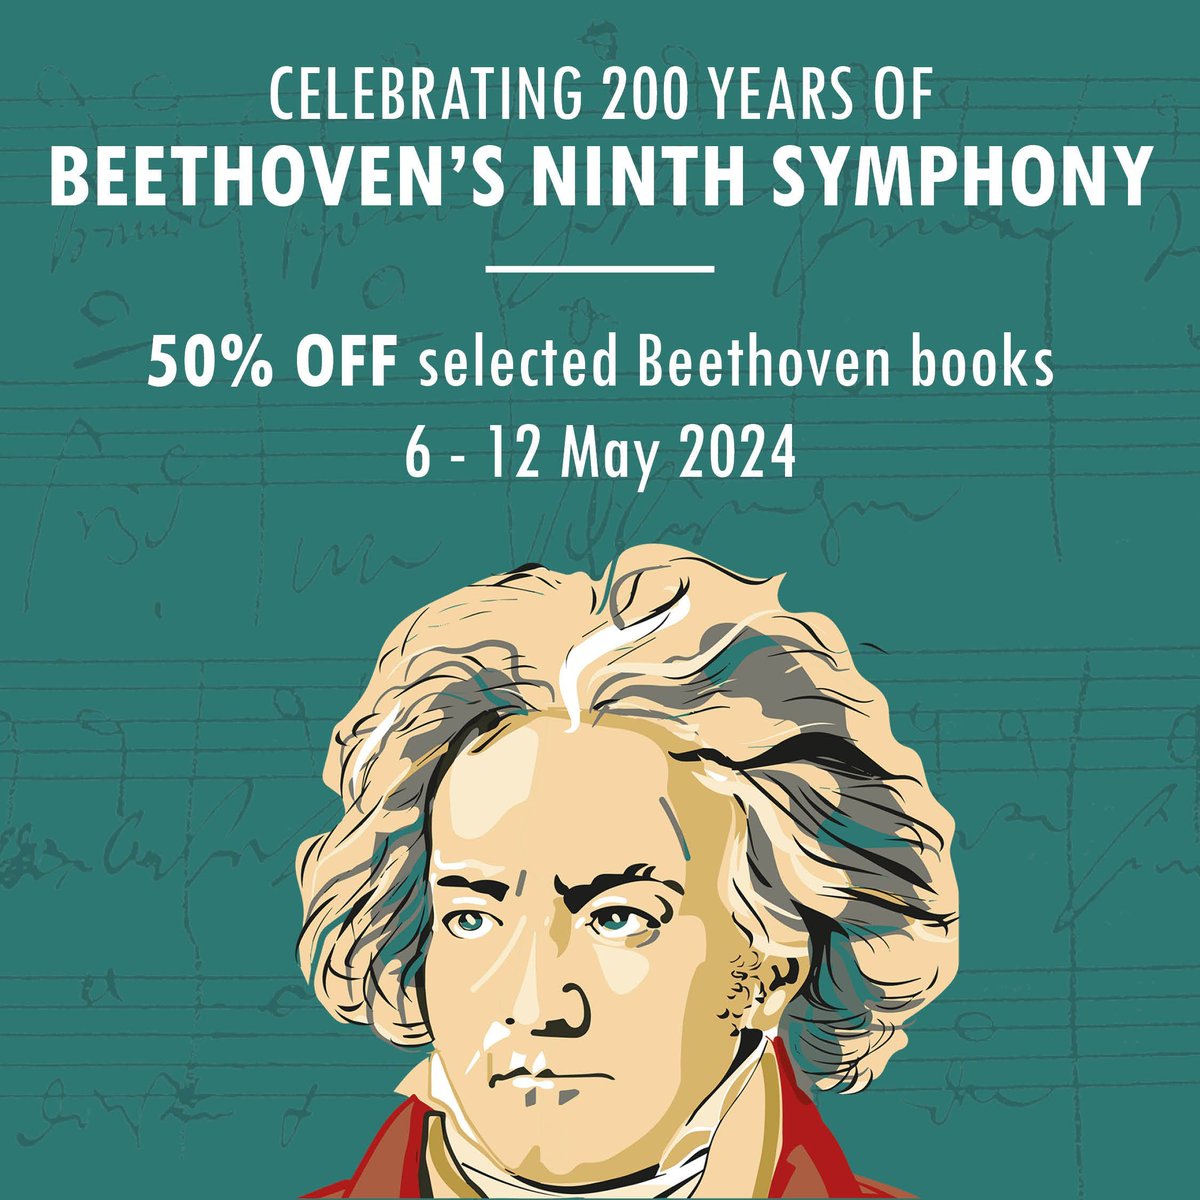 Next week we will be celebrating 200 years since the premiere of one of the most famous pieces of #classicalmusic, #Beethoven's Ninth Symphony! Follow @boydellmusic to stay up-to-date!